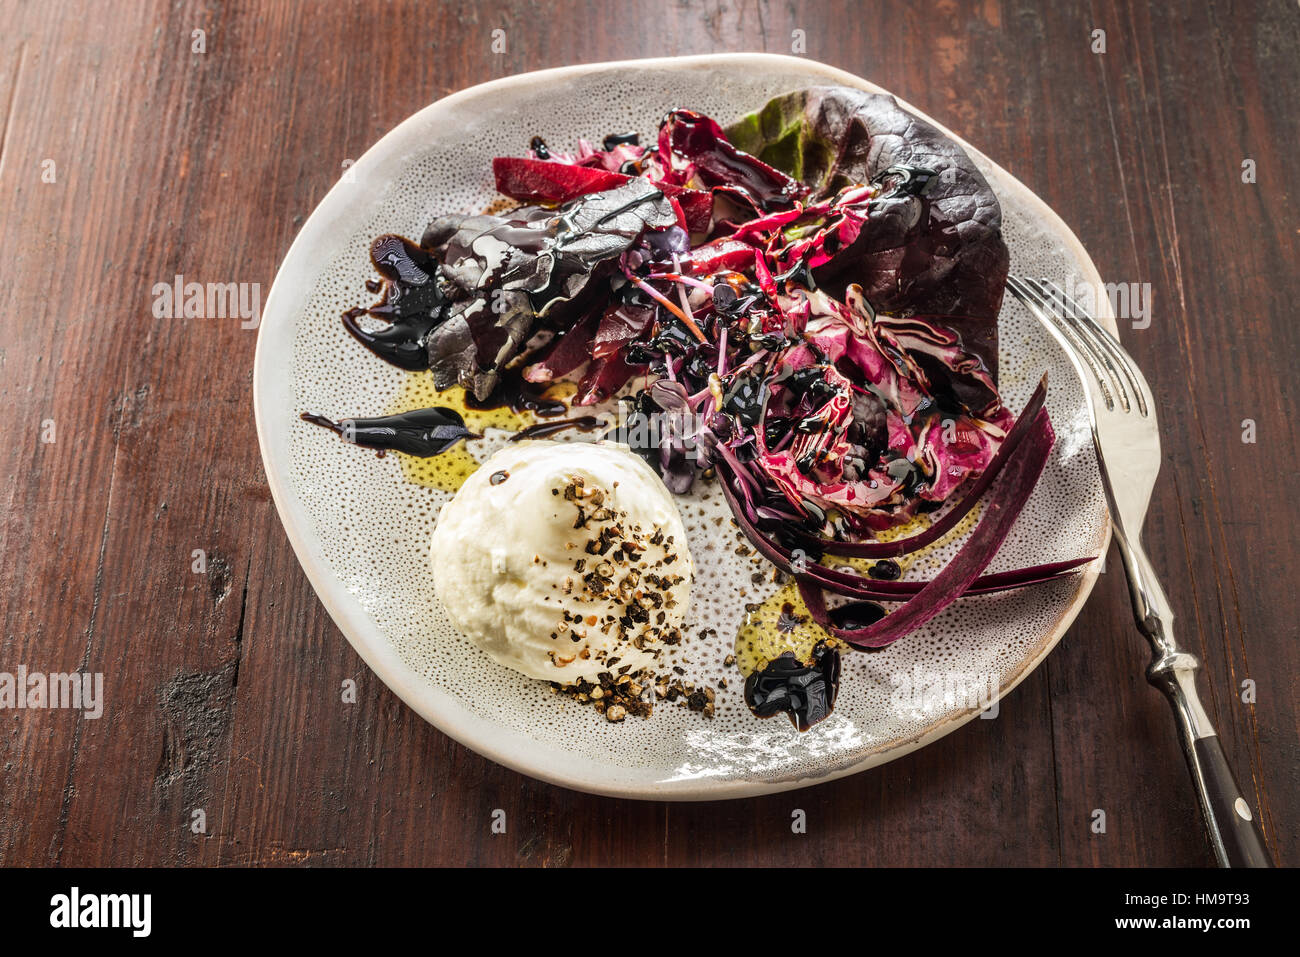 Red salads with goat's cheese on plate, vinegar oil salt pepper. sprouts Stock Photo